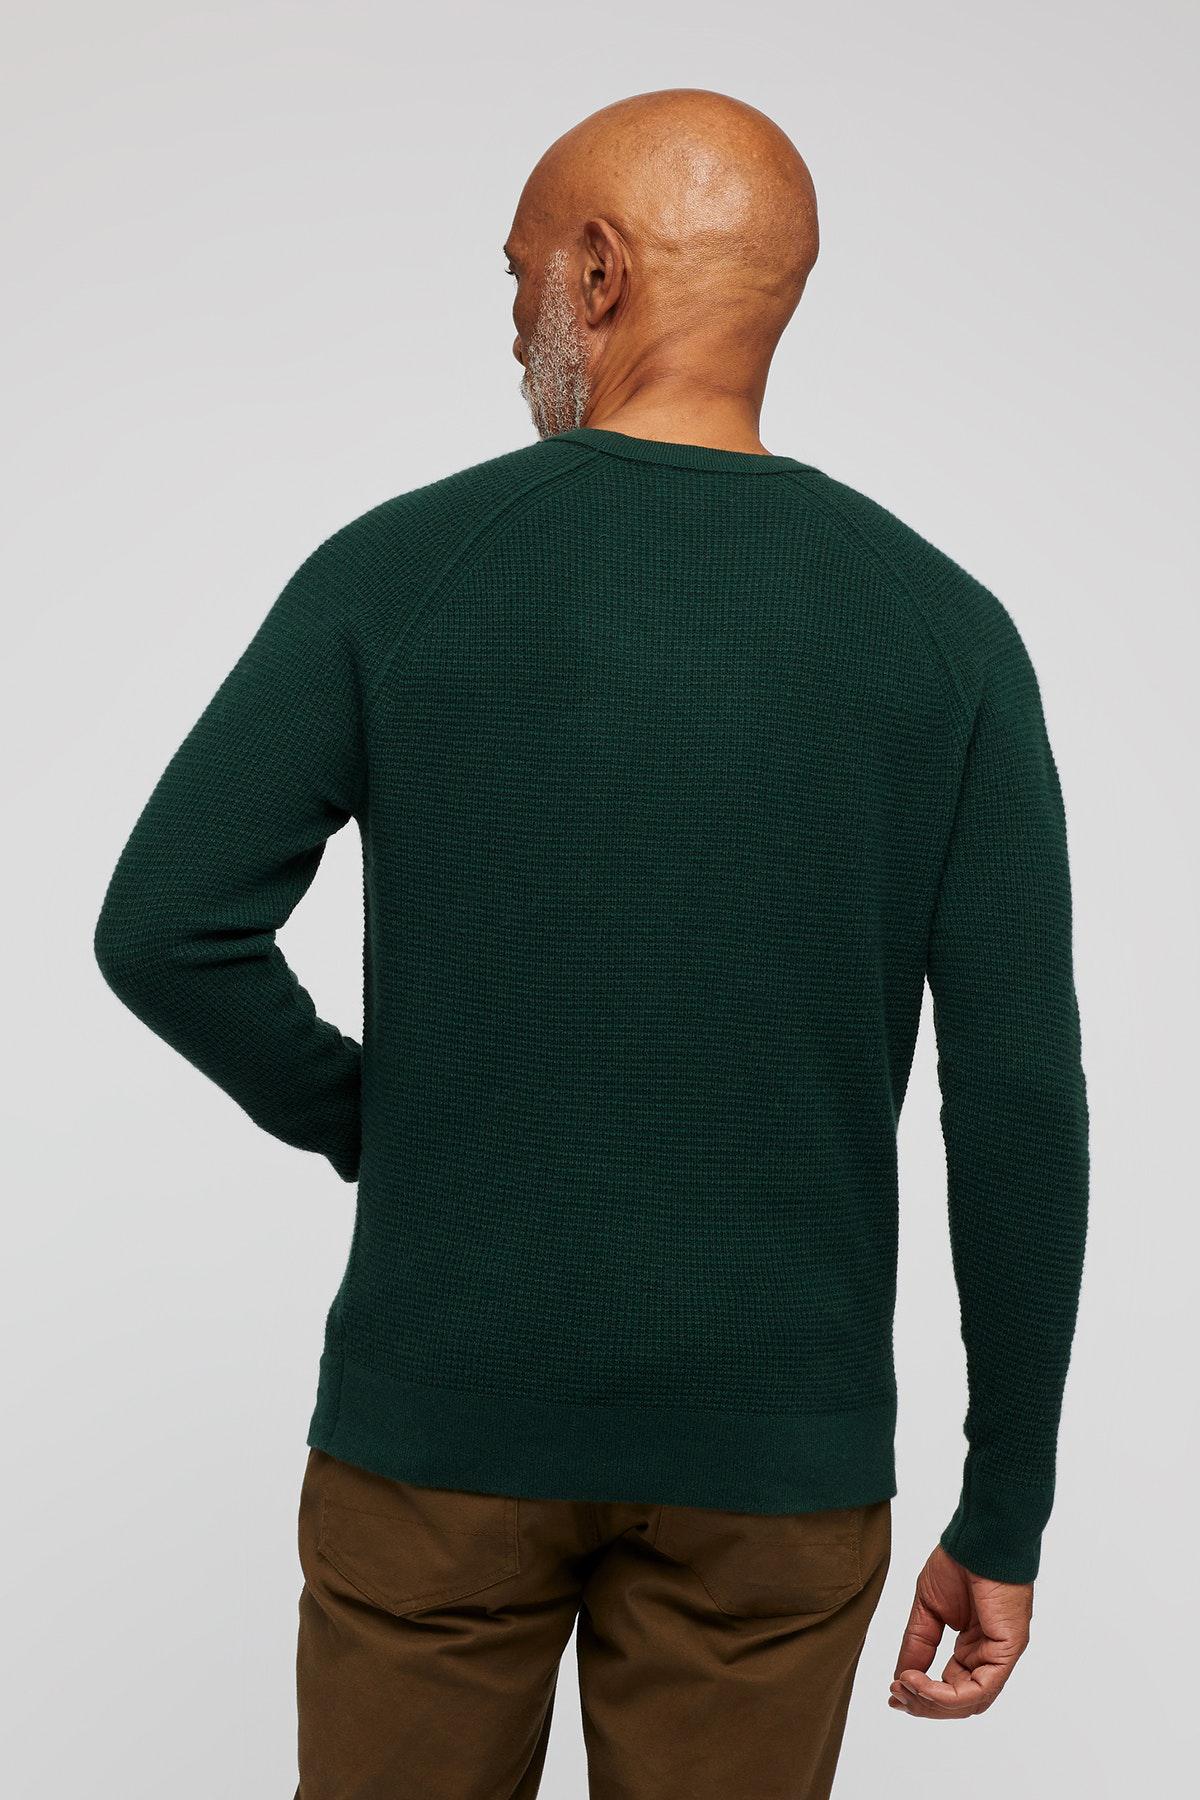 Bonobos Cashmere Waffle Crew Neck Sweater in Green for Men - Lyst